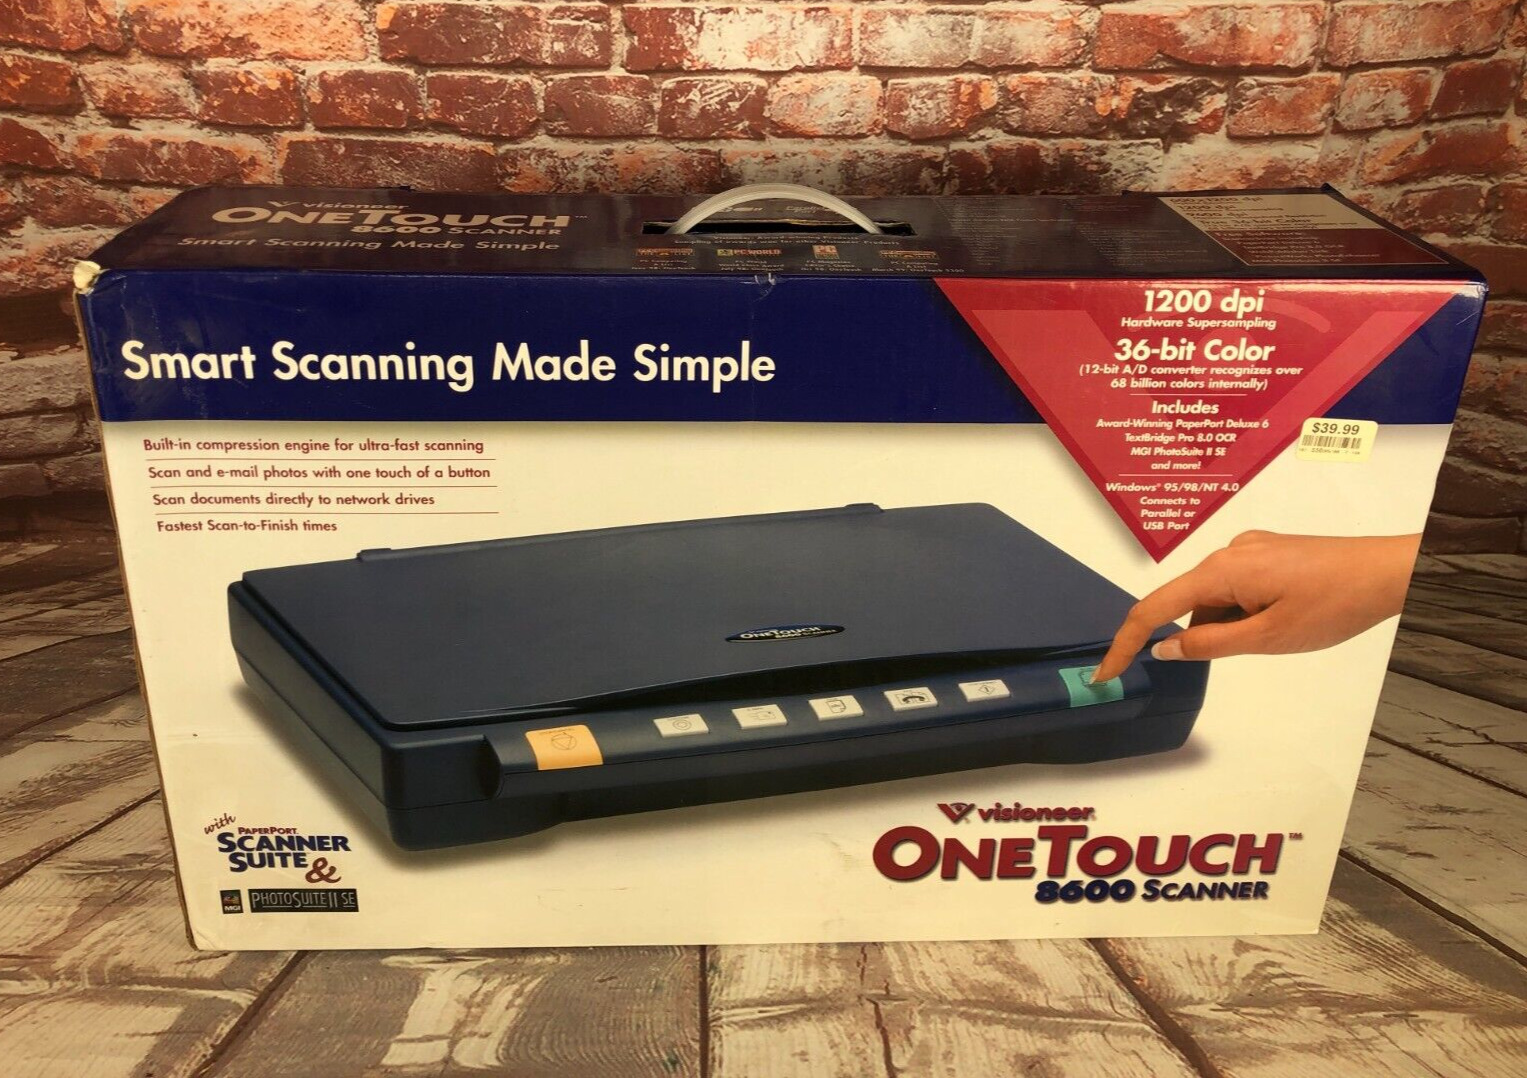 Visioneer OneTouch 8100 Flatbed Scanner